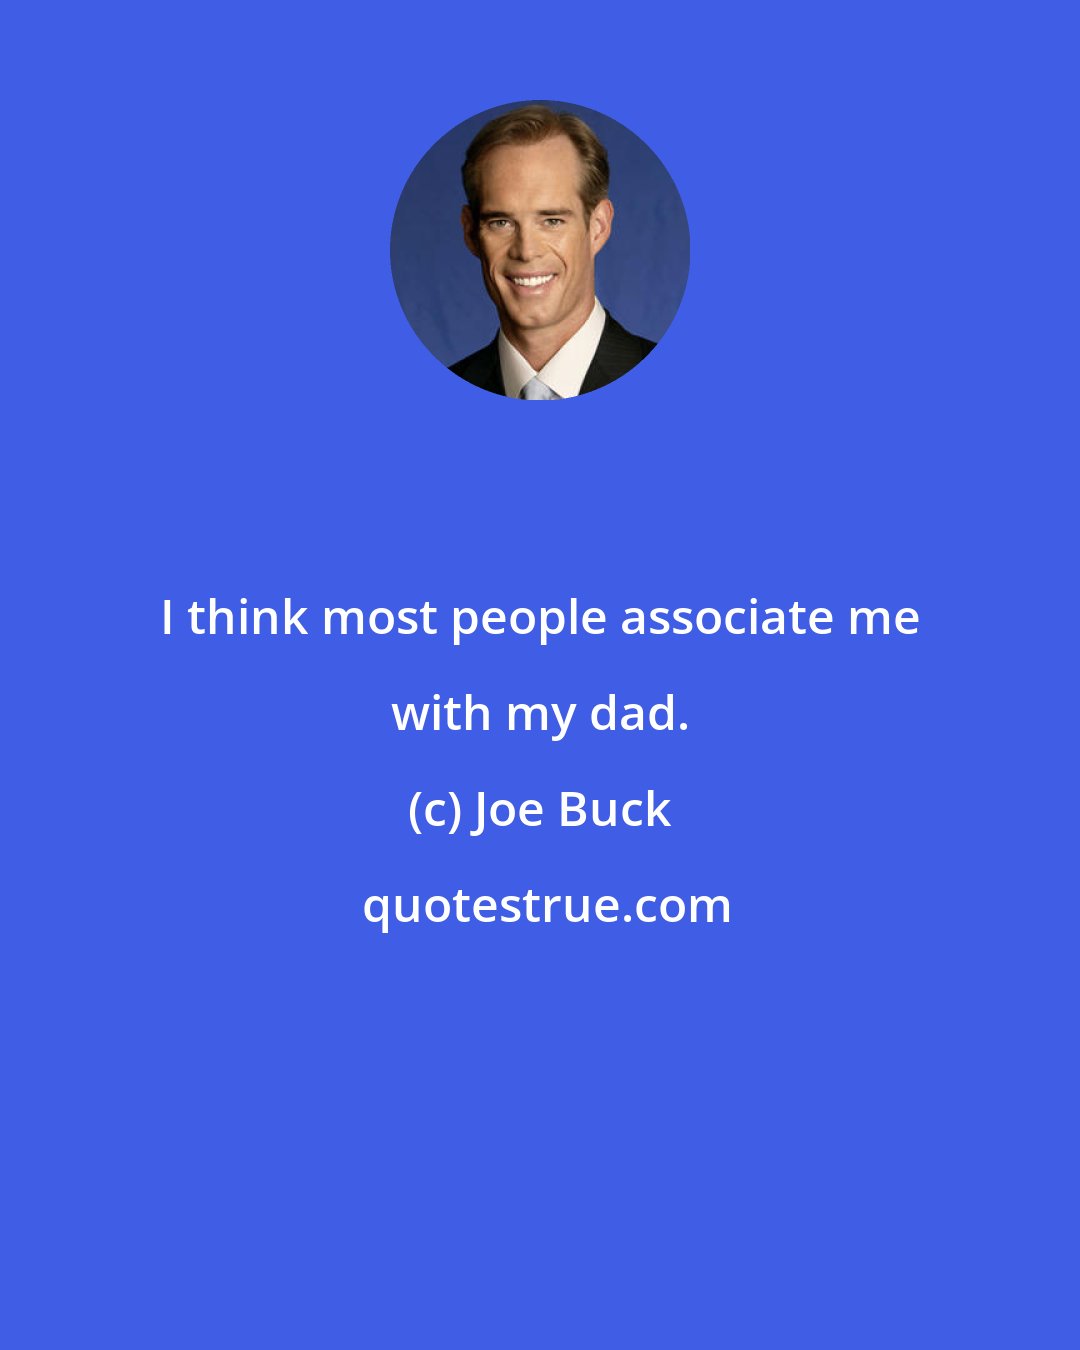 Joe Buck: I think most people associate me with my dad.